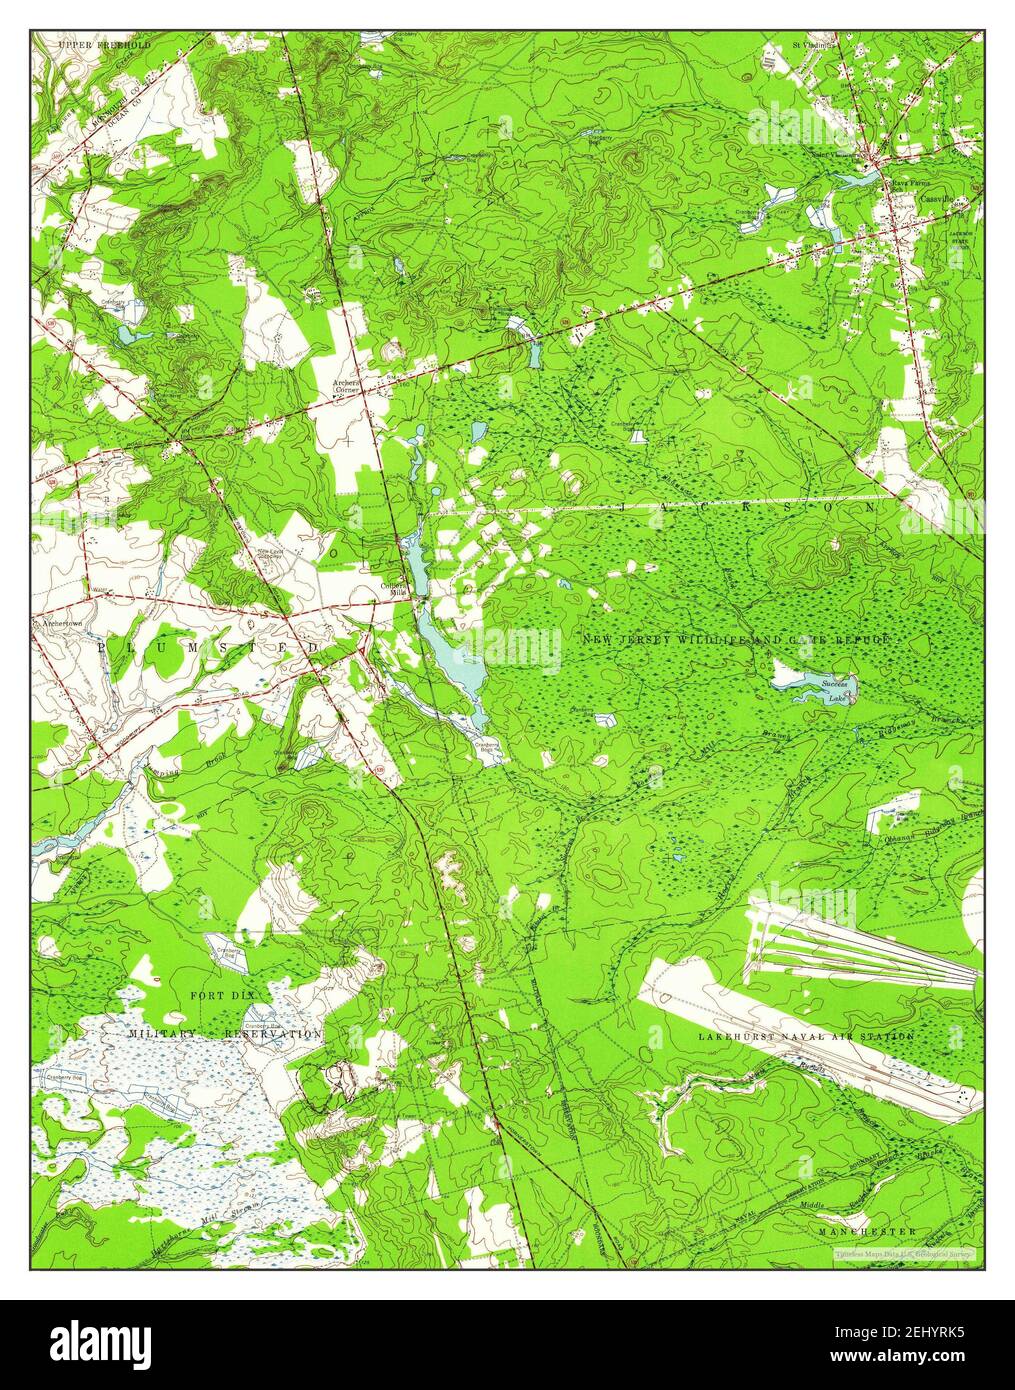 Cassville, New Jersey, map 1957, 1:24000, United States of America by Timeless Maps, data U.S. Geological Survey Stock Photo